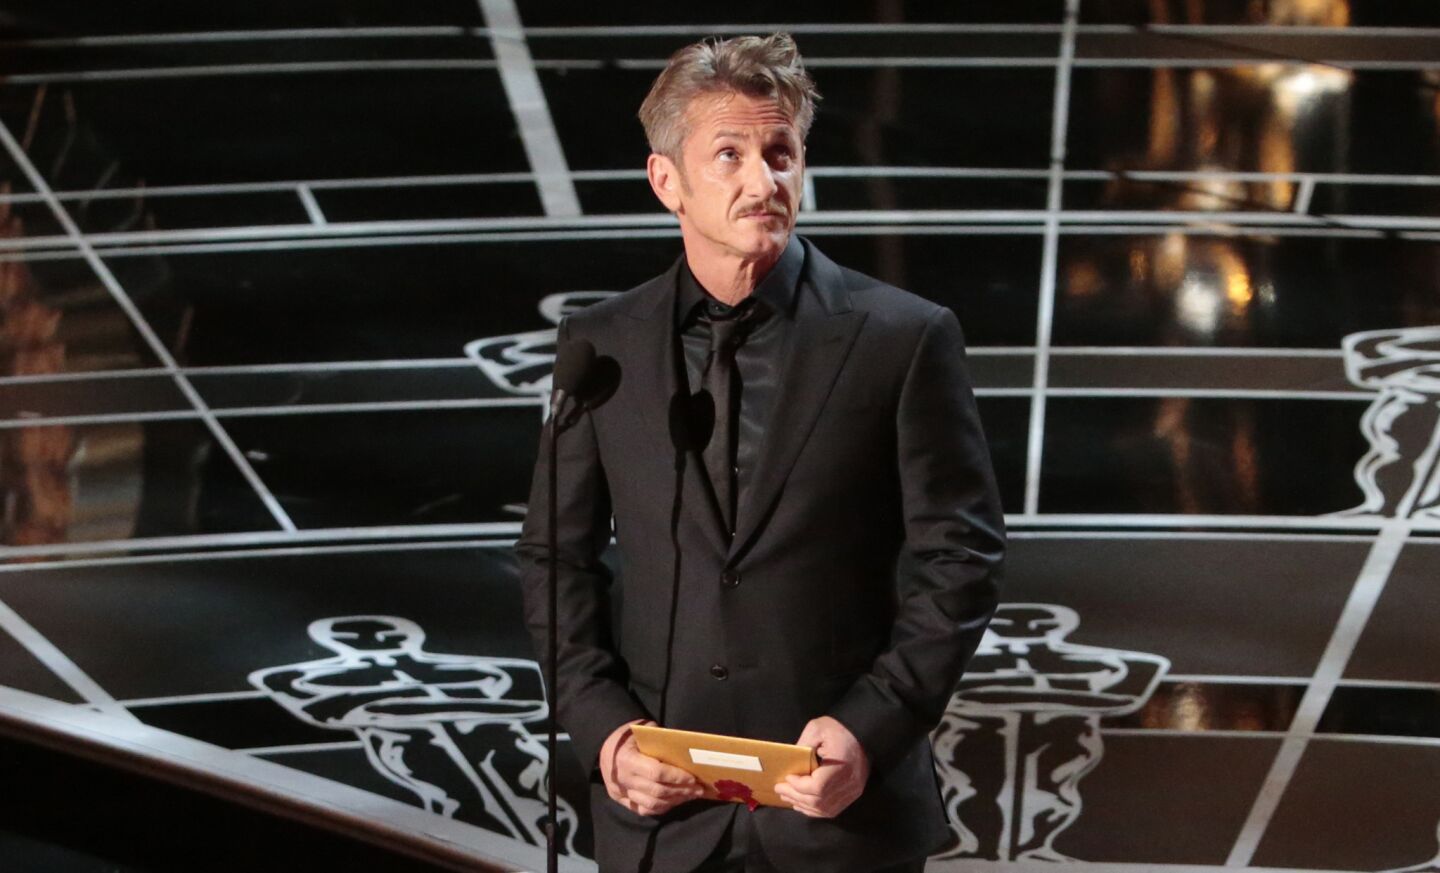 When Sean Penn opened the envelope to announce the best picture at the 87th Academy Awards, he asked, "Who gave this son of a ... his green card?" before revealing "Birdman" as the winner. In a year when the Oscars were being scrutinized for the lack of diversity among the nominees in the top categories, some felt Penn's joke about director Alejandro G. Iñárritu's nationality fell flat.